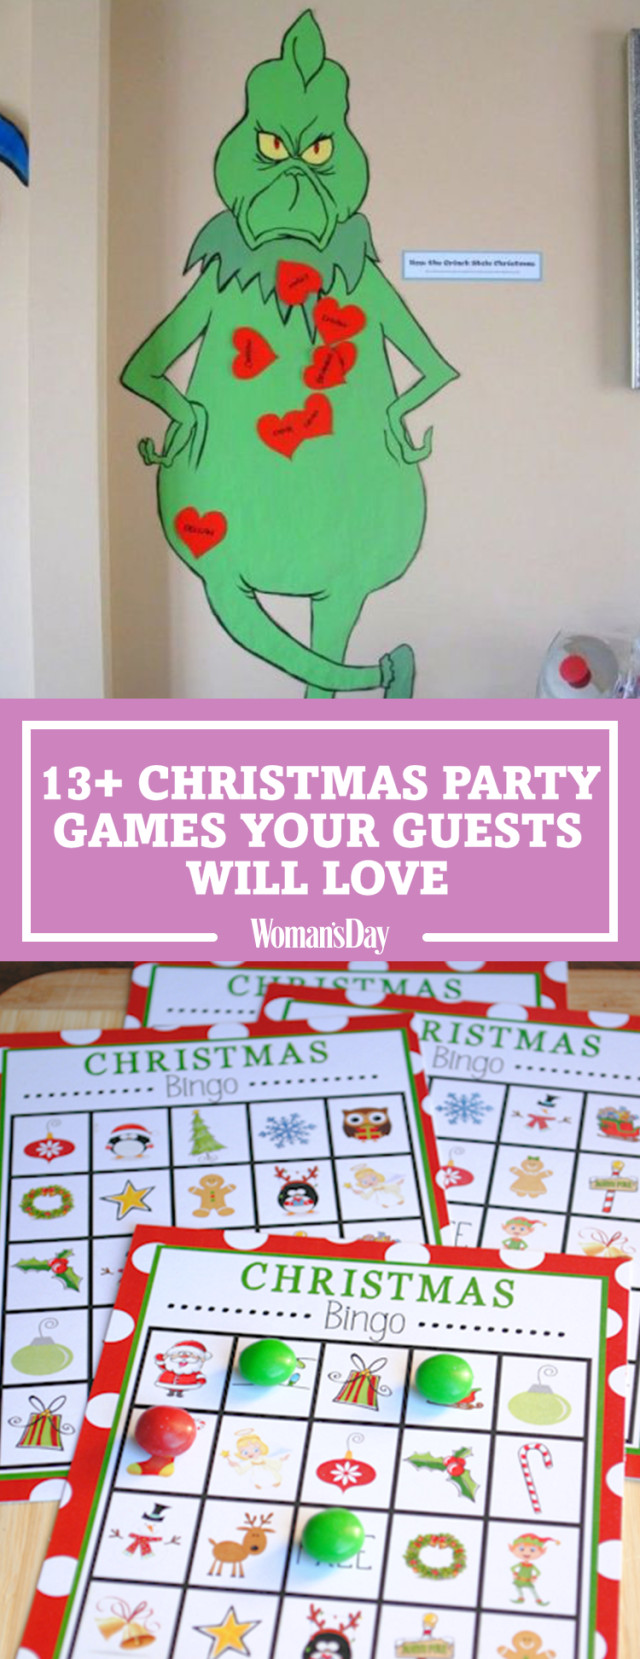 Enjoyable Office Christmas Party Games Ideas
 The ly Christmas Games You ll Need for Your Next Holiday